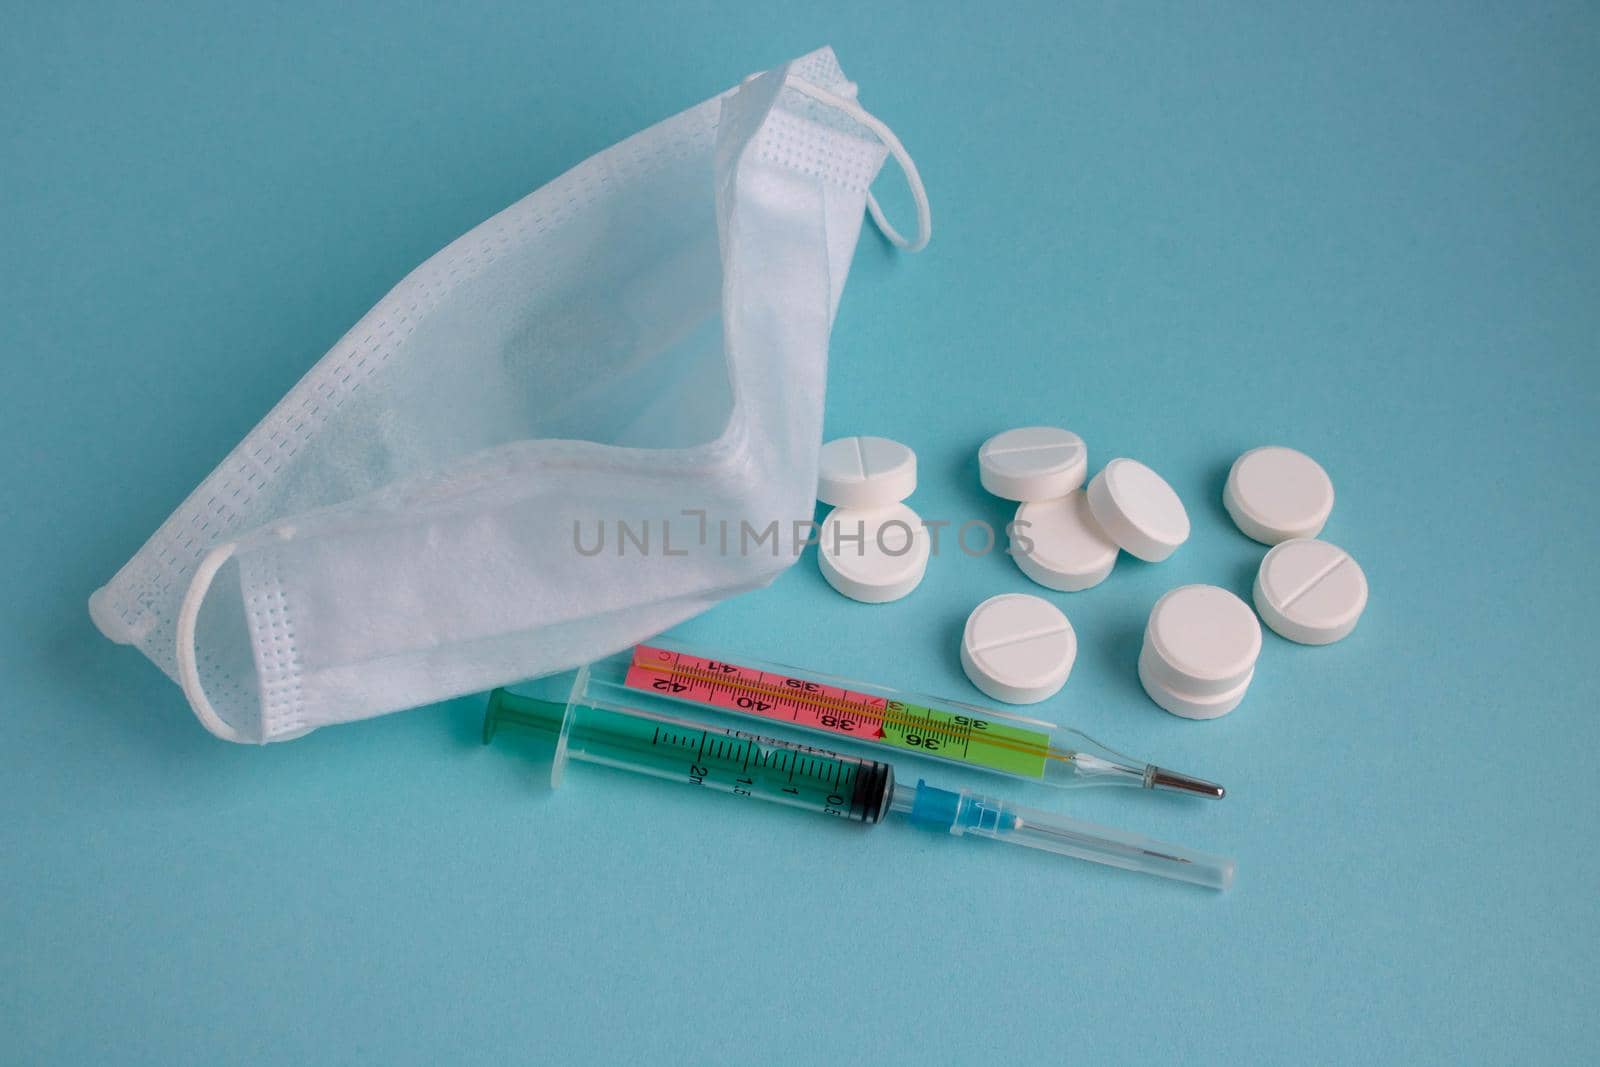 anti-virus medical supplies. concept of deadly coronavirus epidemic. thermometer, mask, syringe with vaccine and antibiotic pills by lapushka62